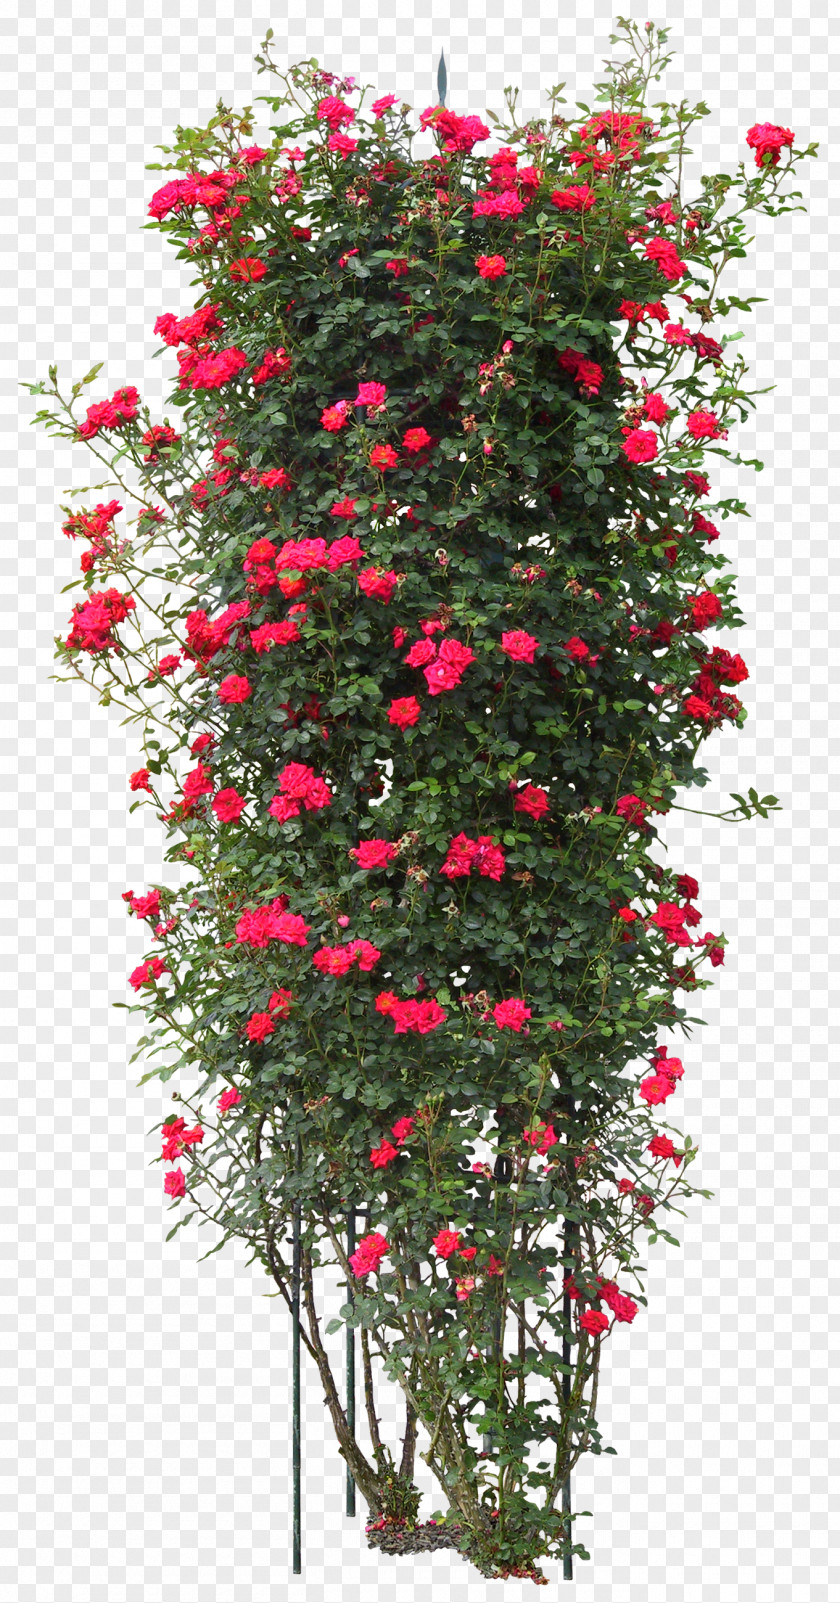 Bushes Quercus Suber Tree Plant Rose PNG